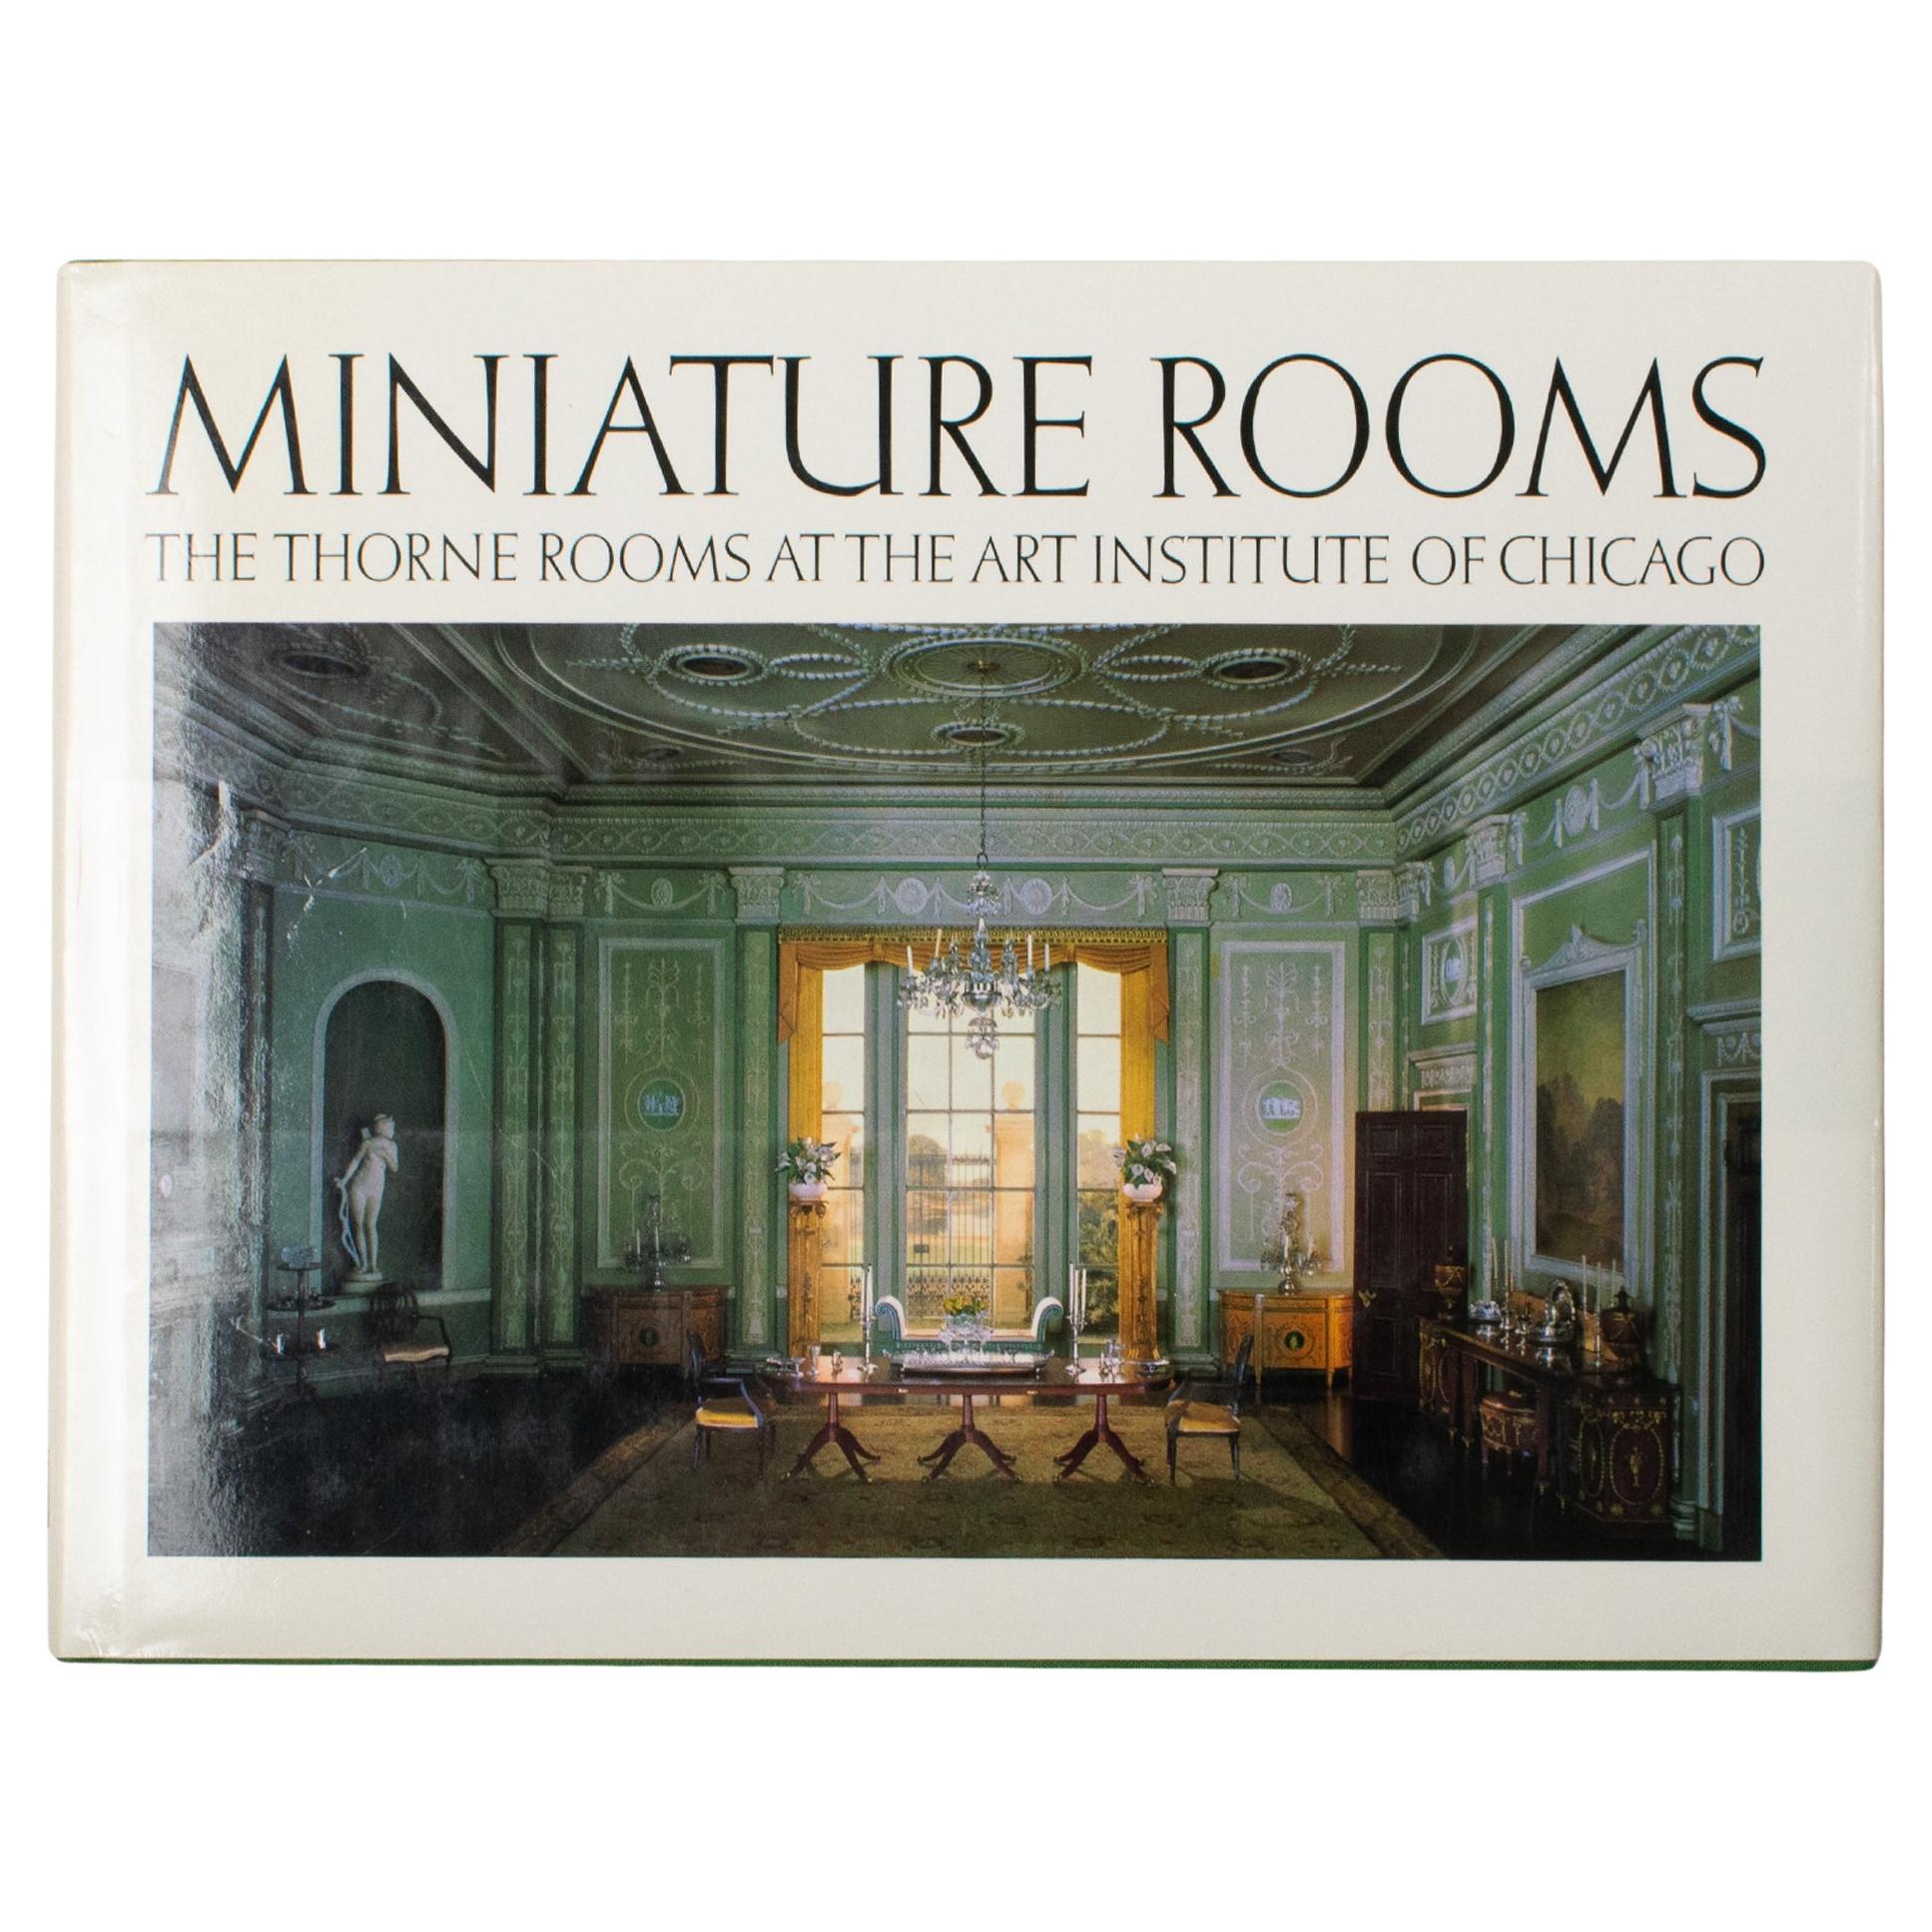 Miniature Rooms Book, The Thorne Rooms at the Art Institute of Chicago, 1983